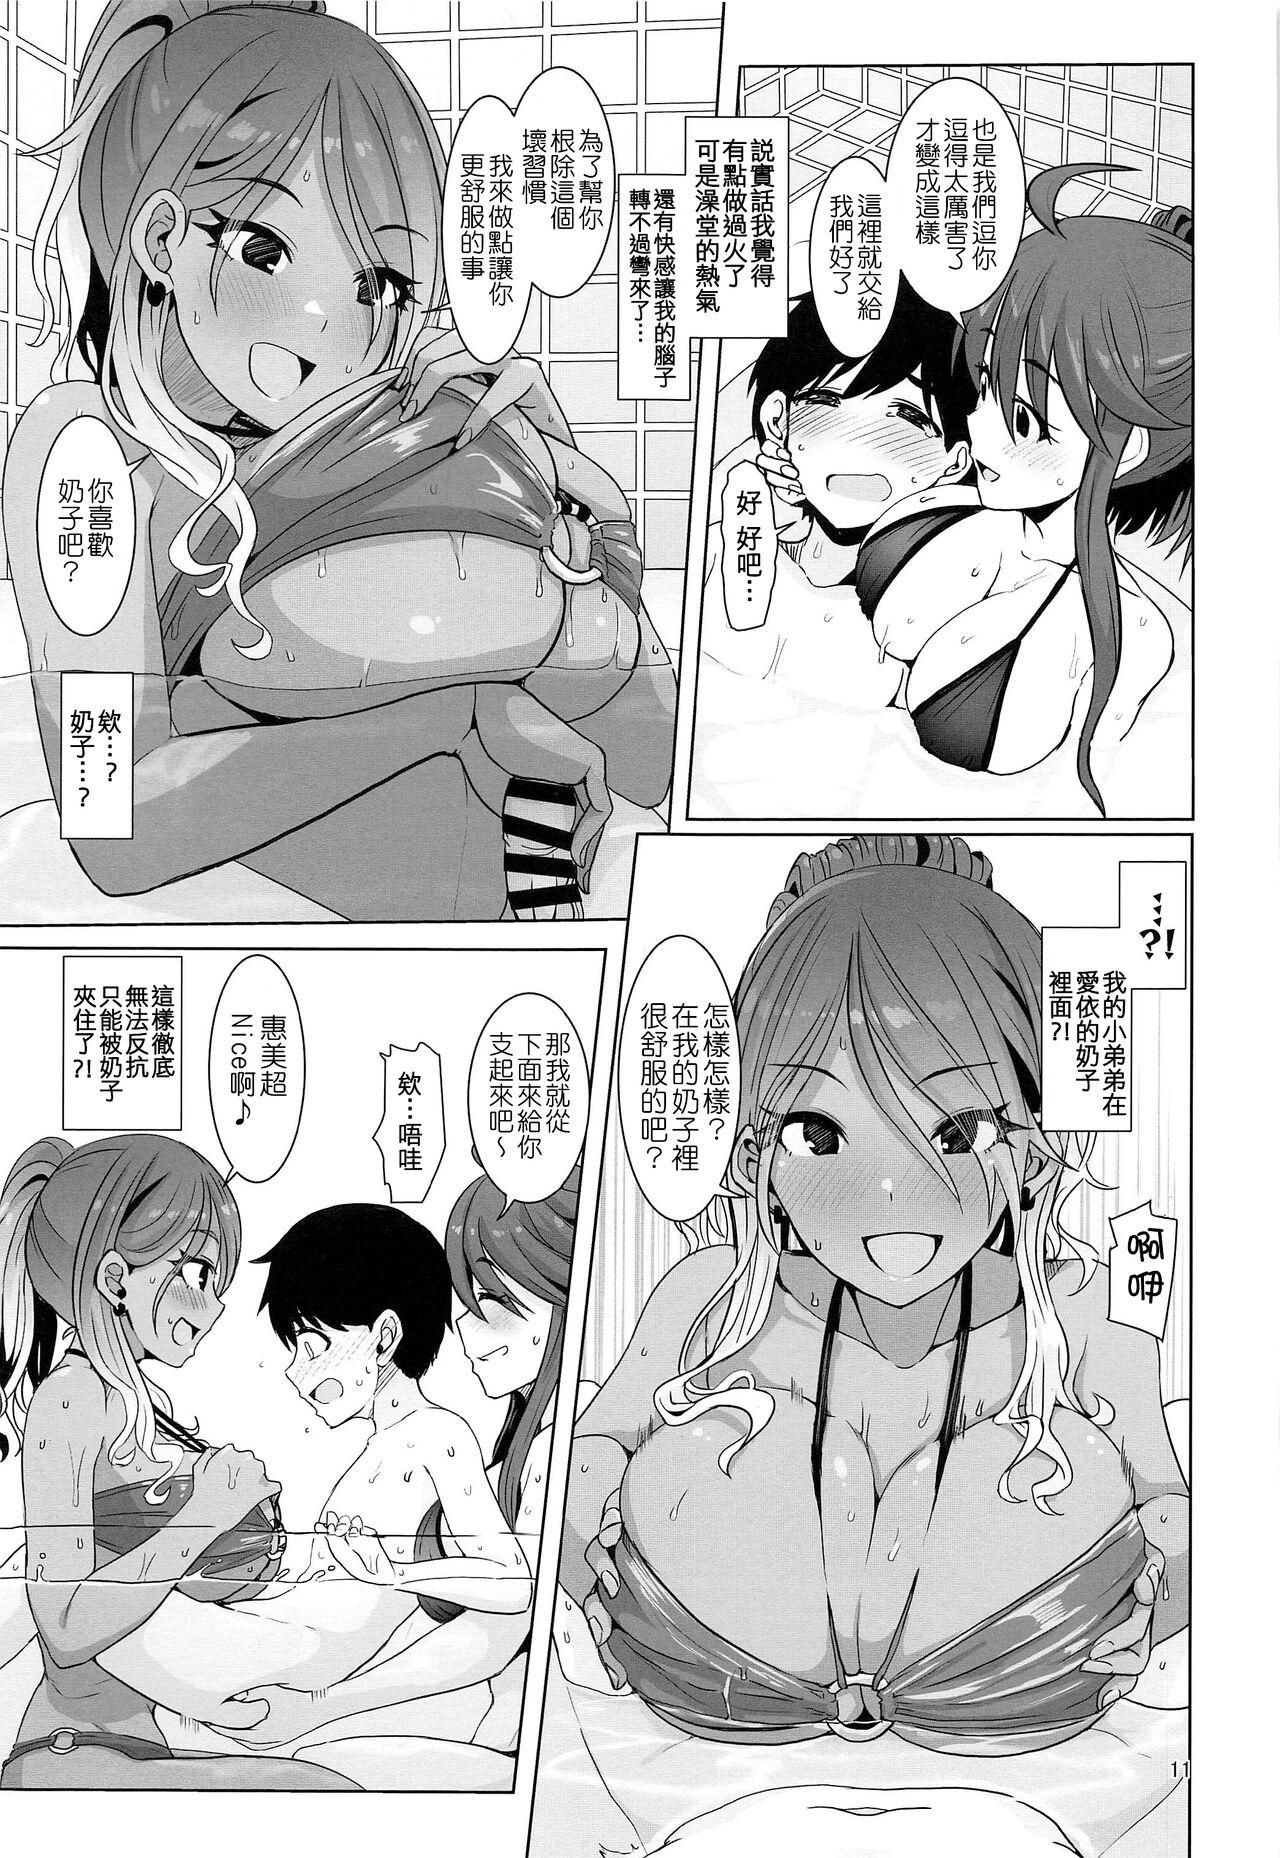 Self May You Make Me Happy? - The idolmaster Butt Sex - Page 13